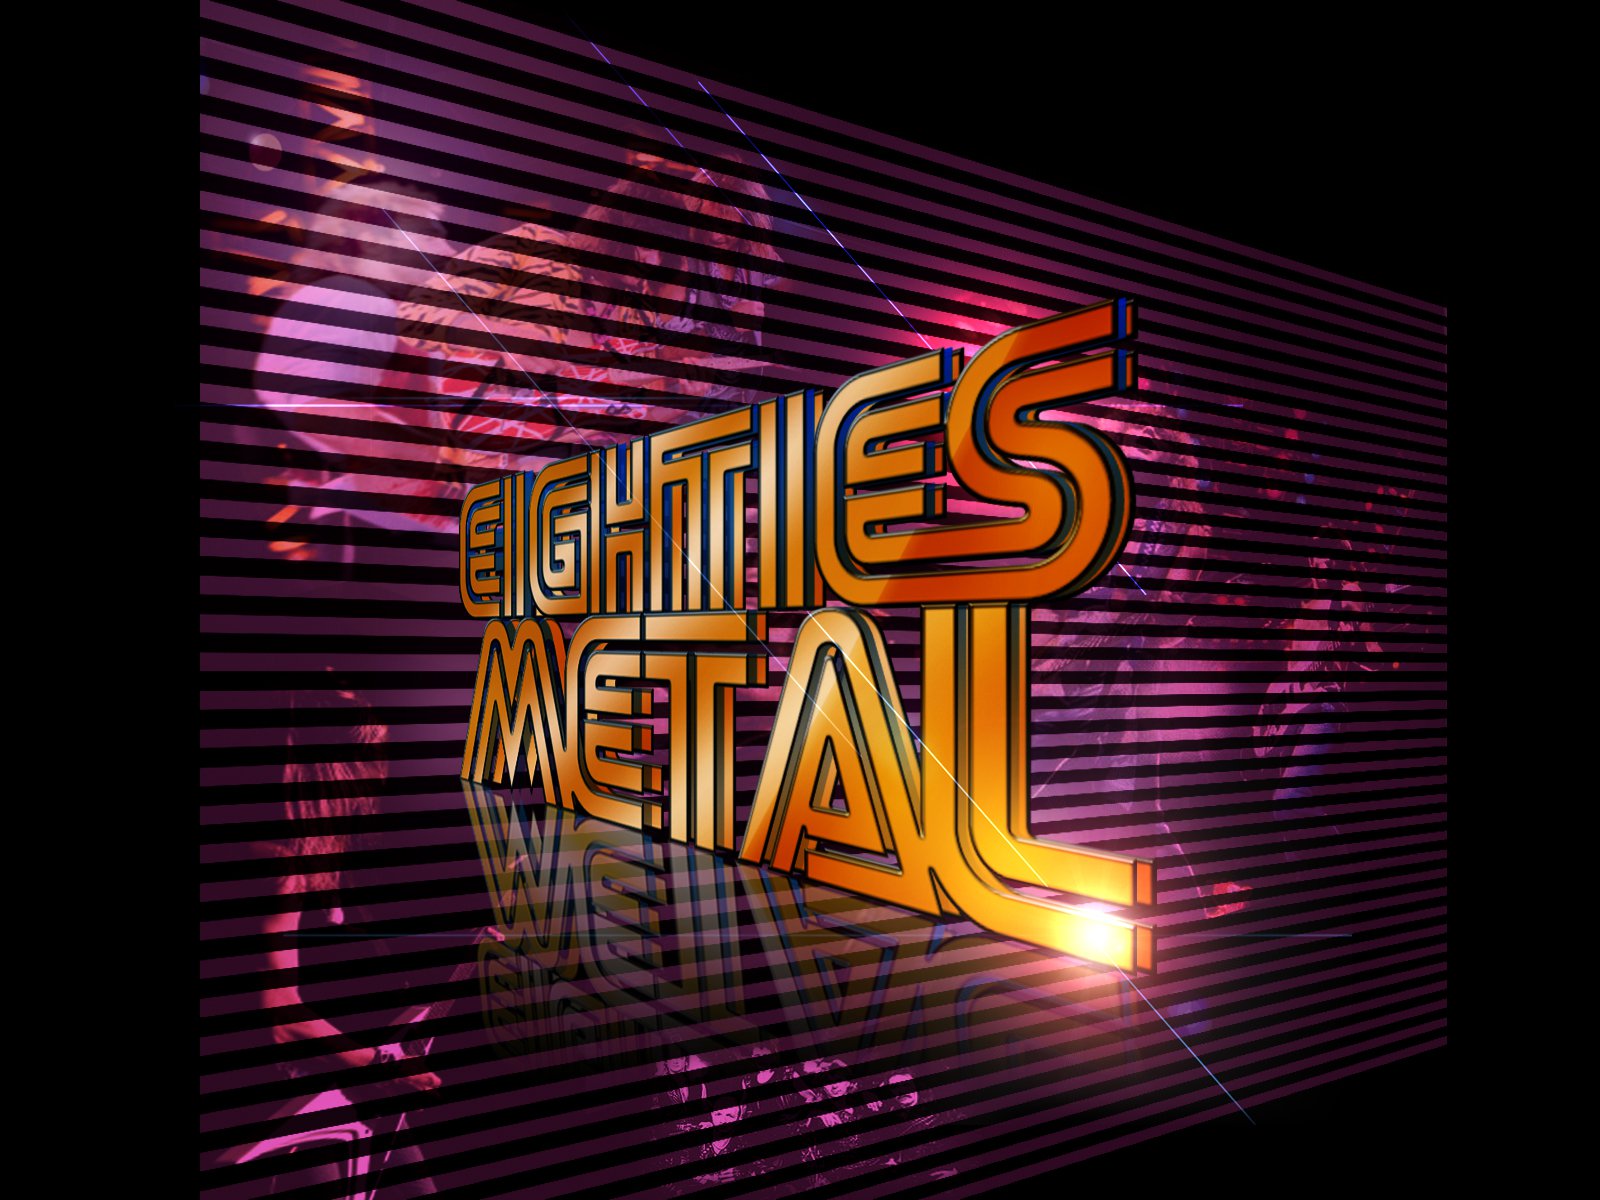 New 80s Metal Hard Rock Wallpaper Just Added To Wiki